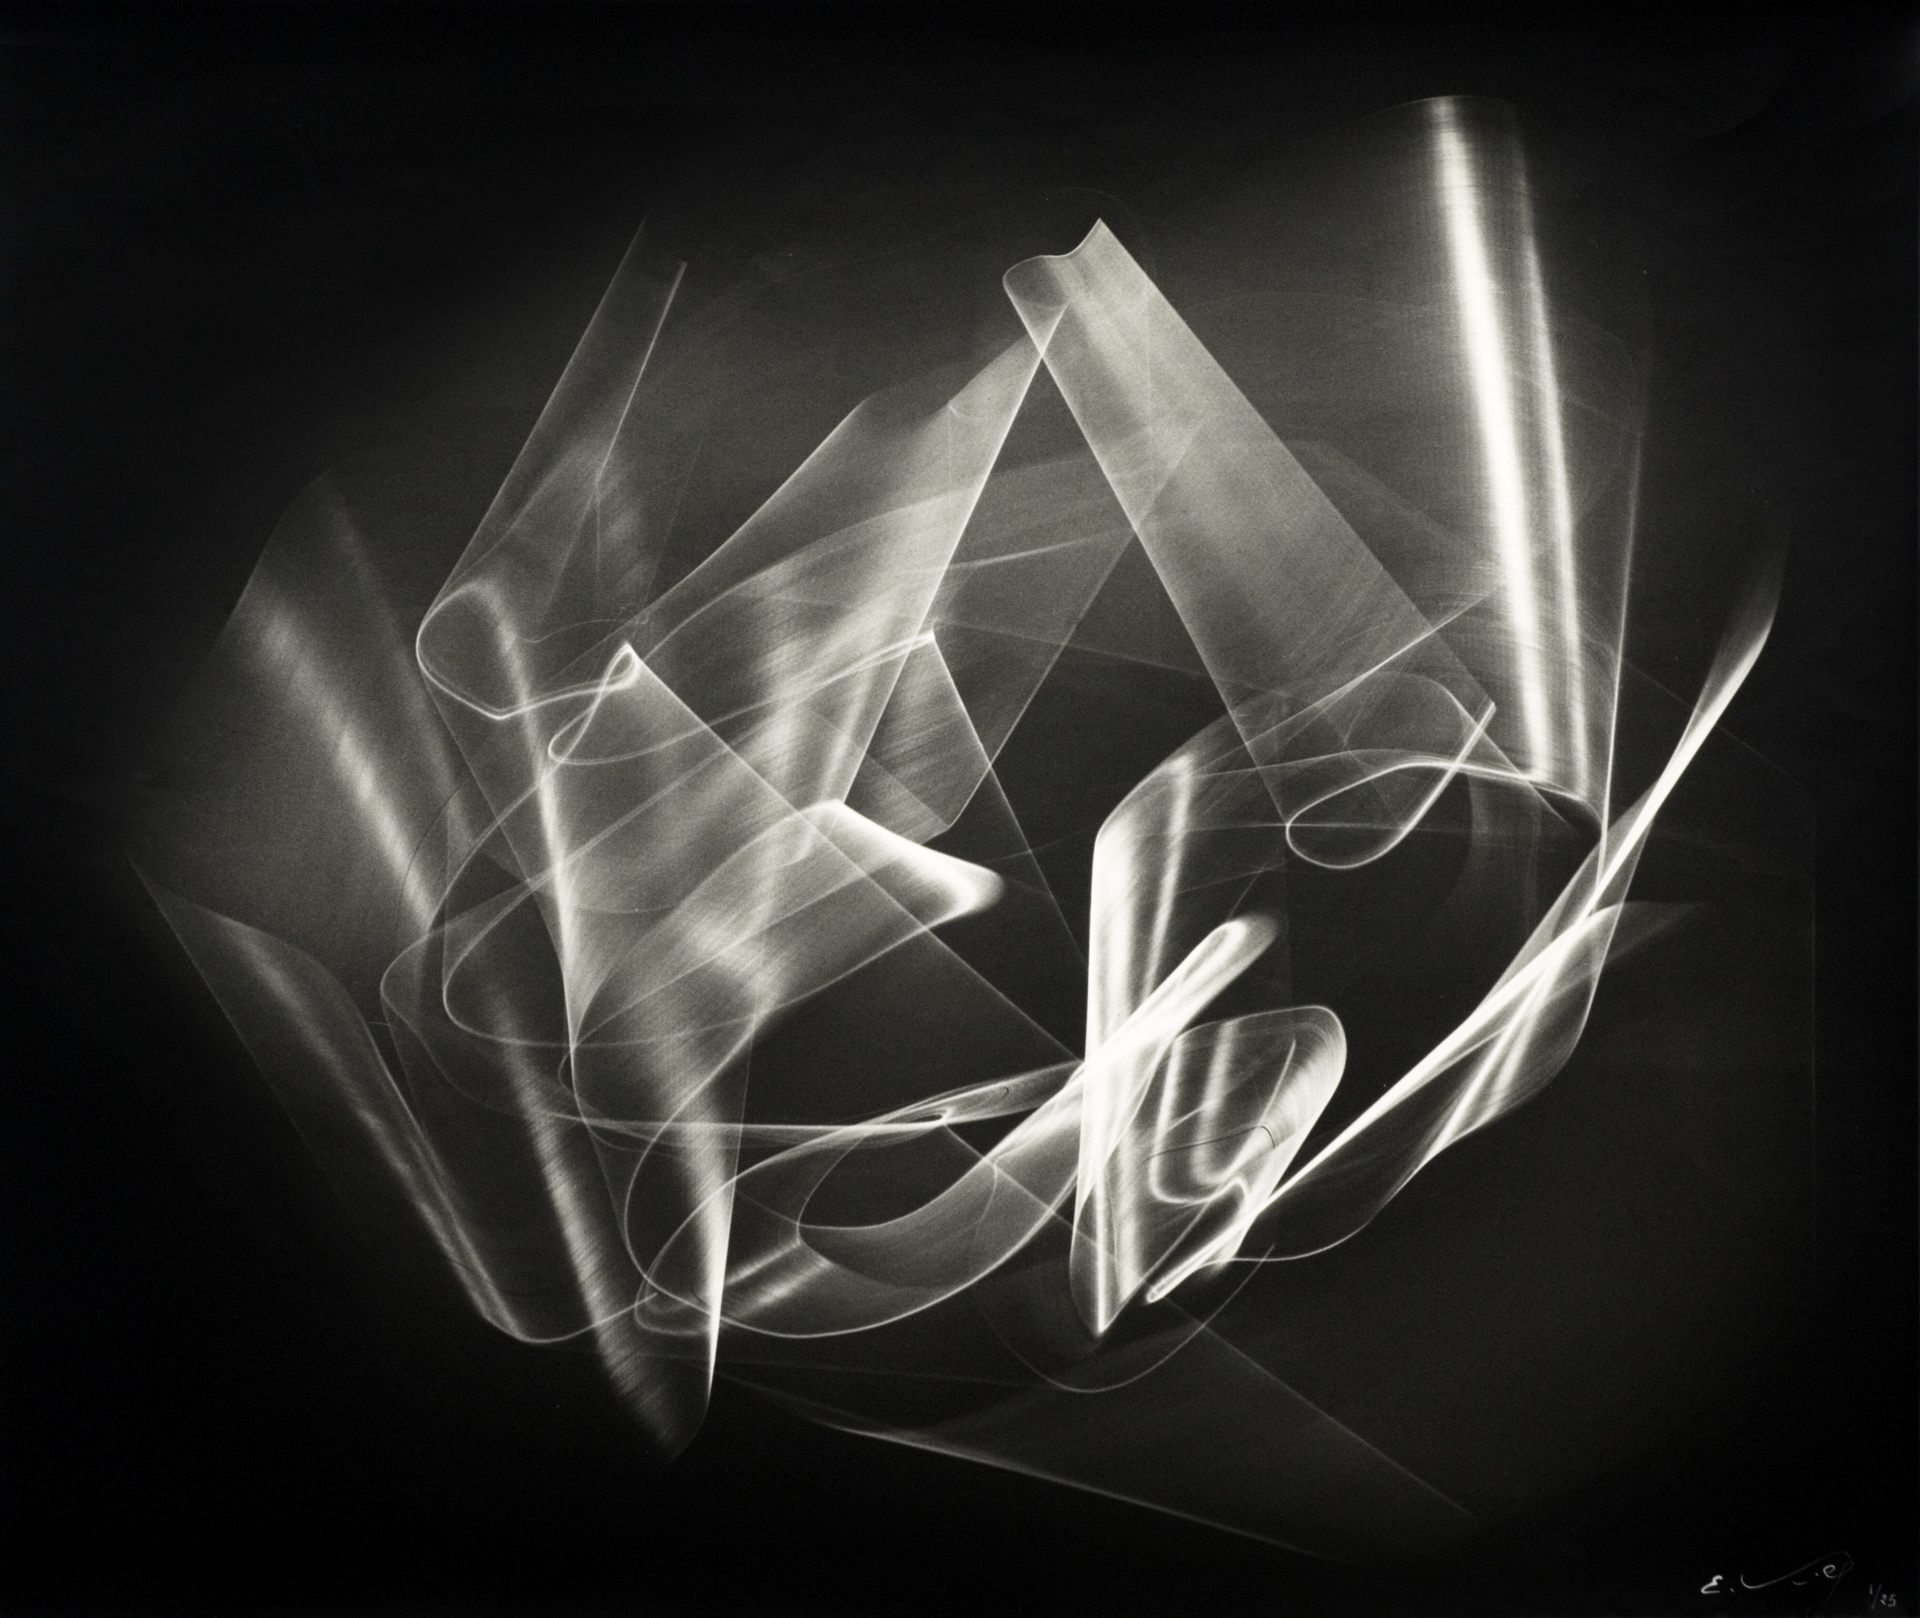 Art photography, abstract photography and kinetic art